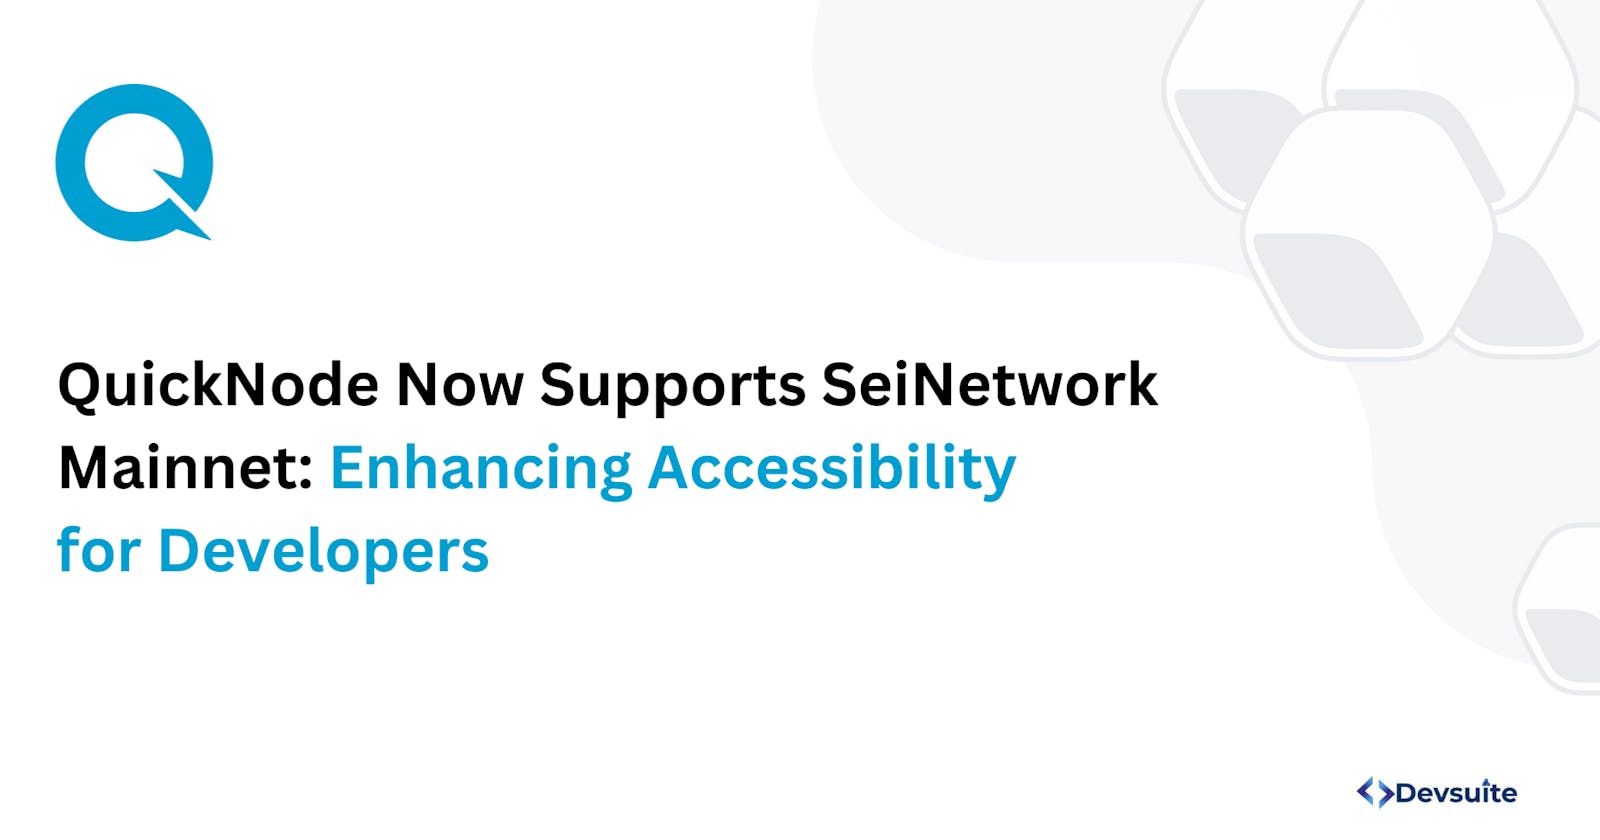 QuickNode Now Supports SeiNetwork Mainnet: Enhancing Accessibility for Developers